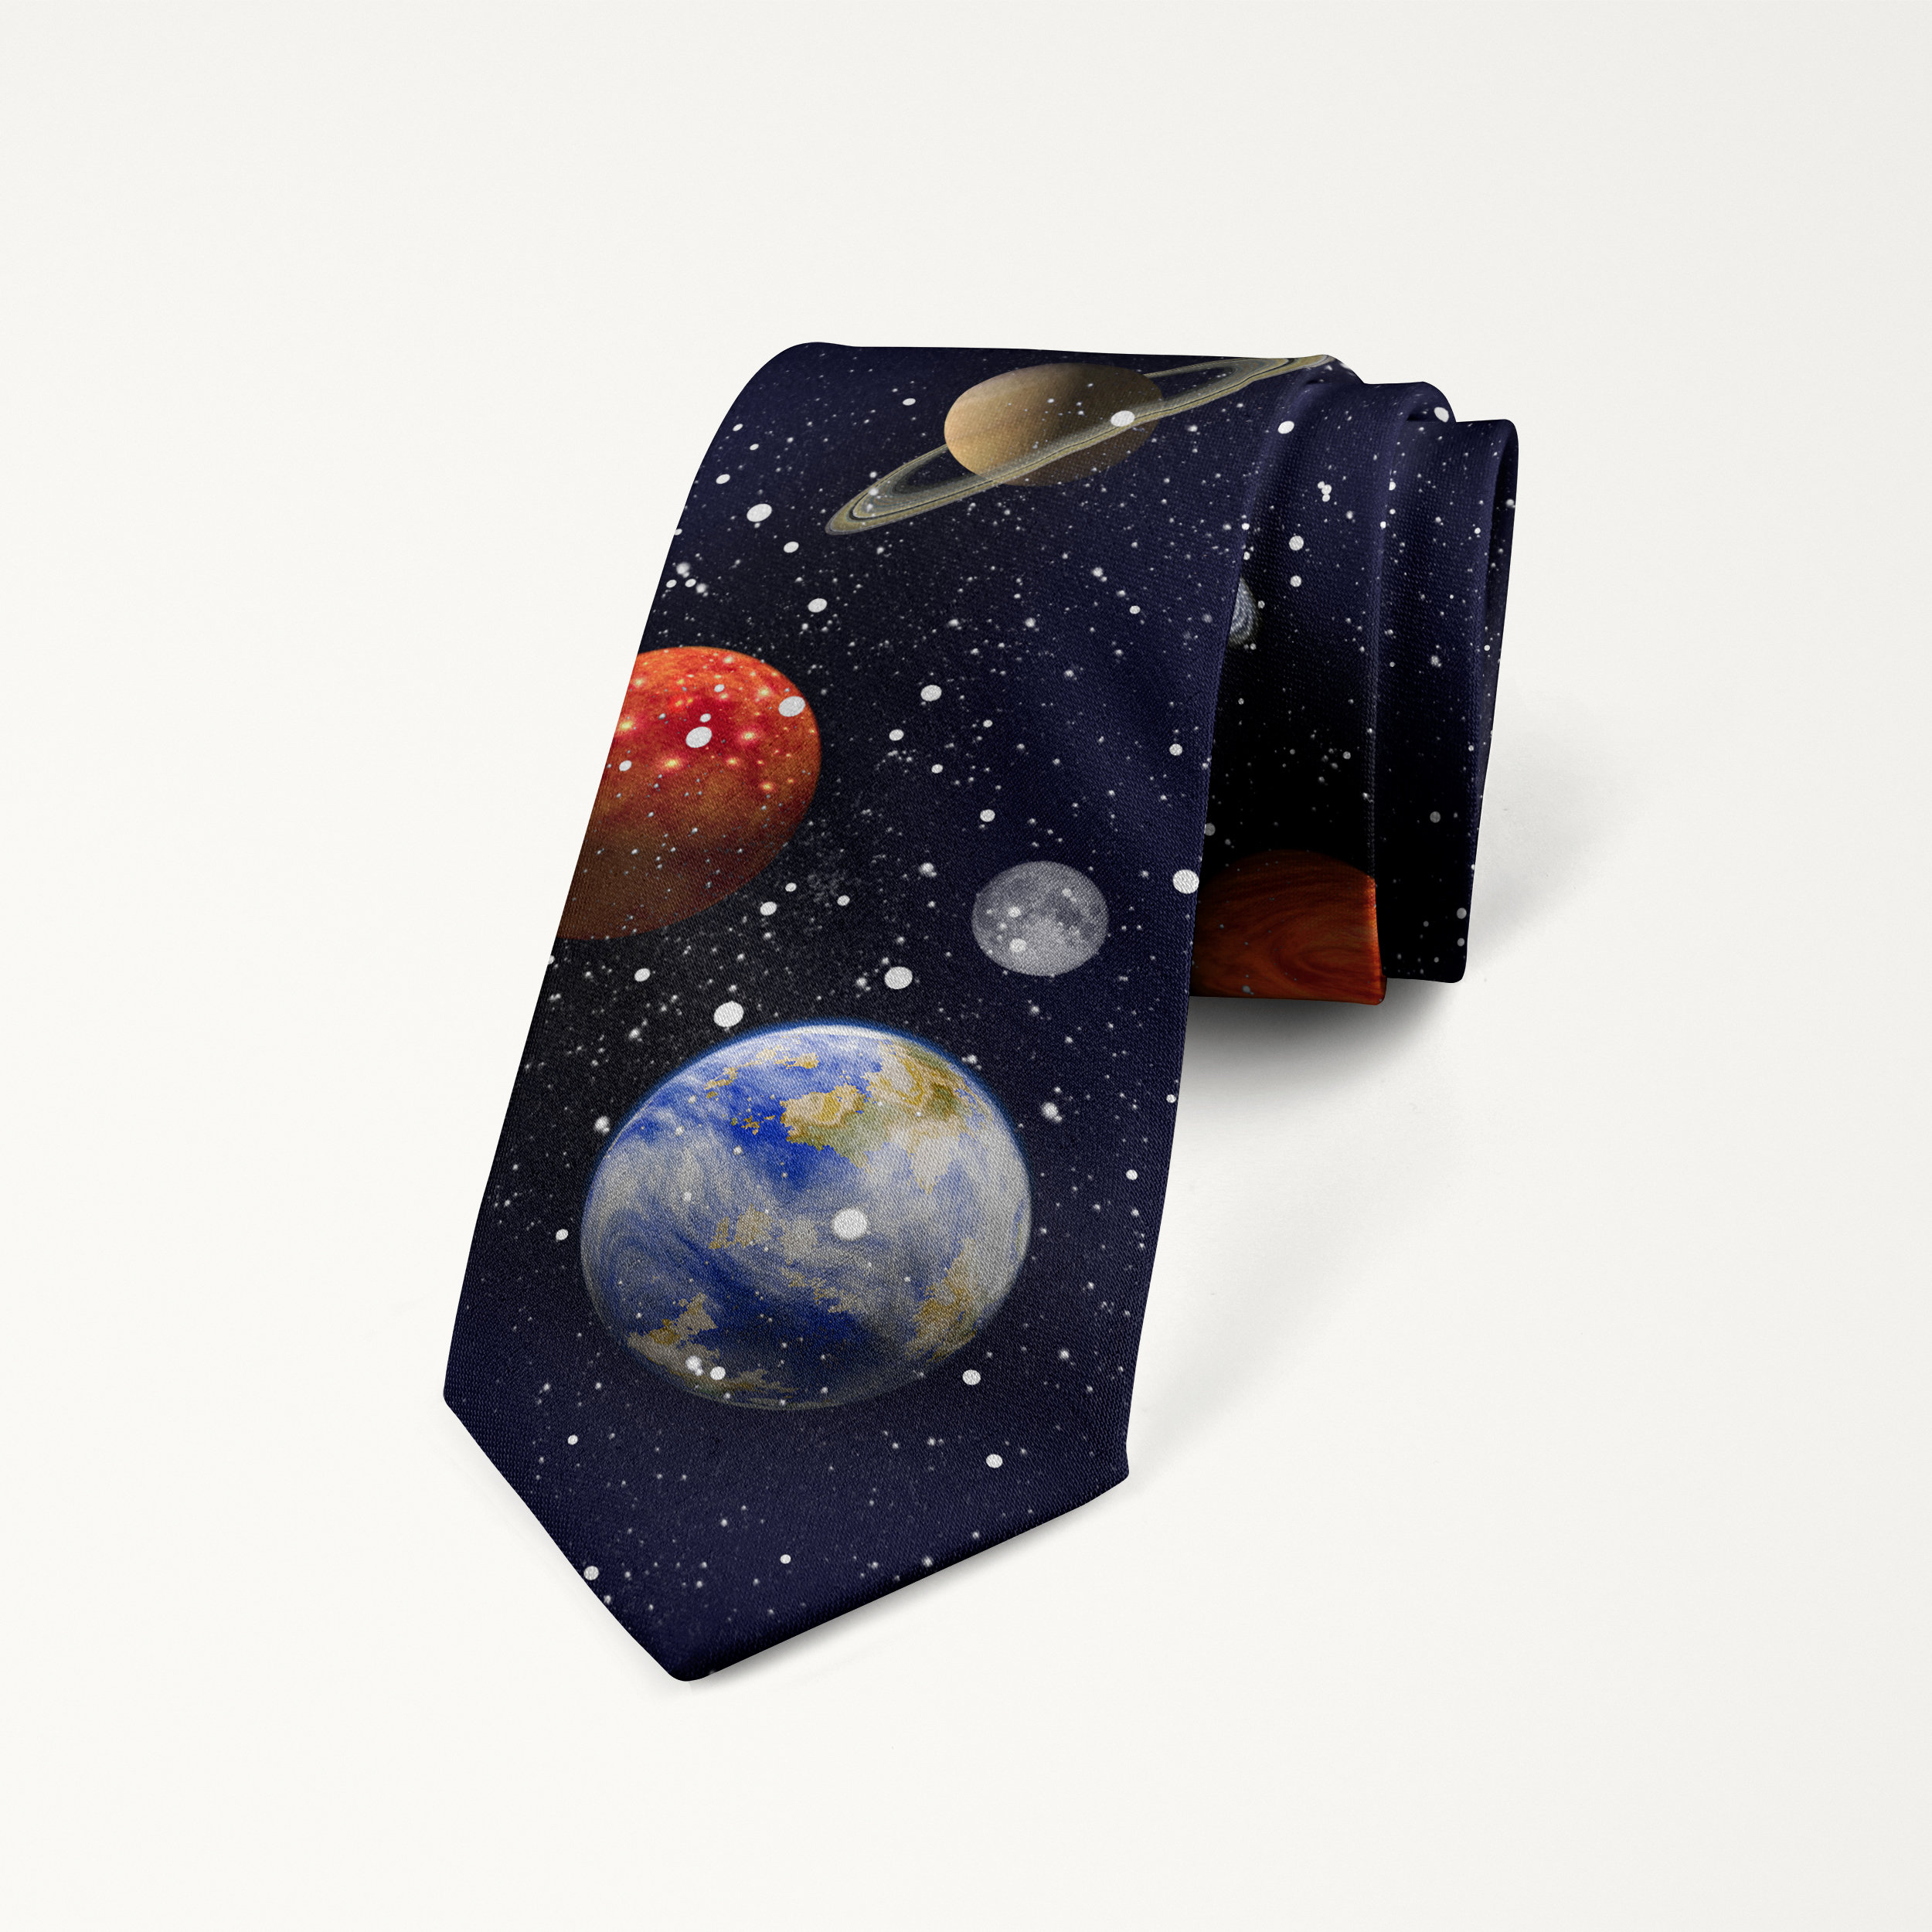 Solar System Planets Tie Fake Tie Funny Costume Tote Bag by Noirty